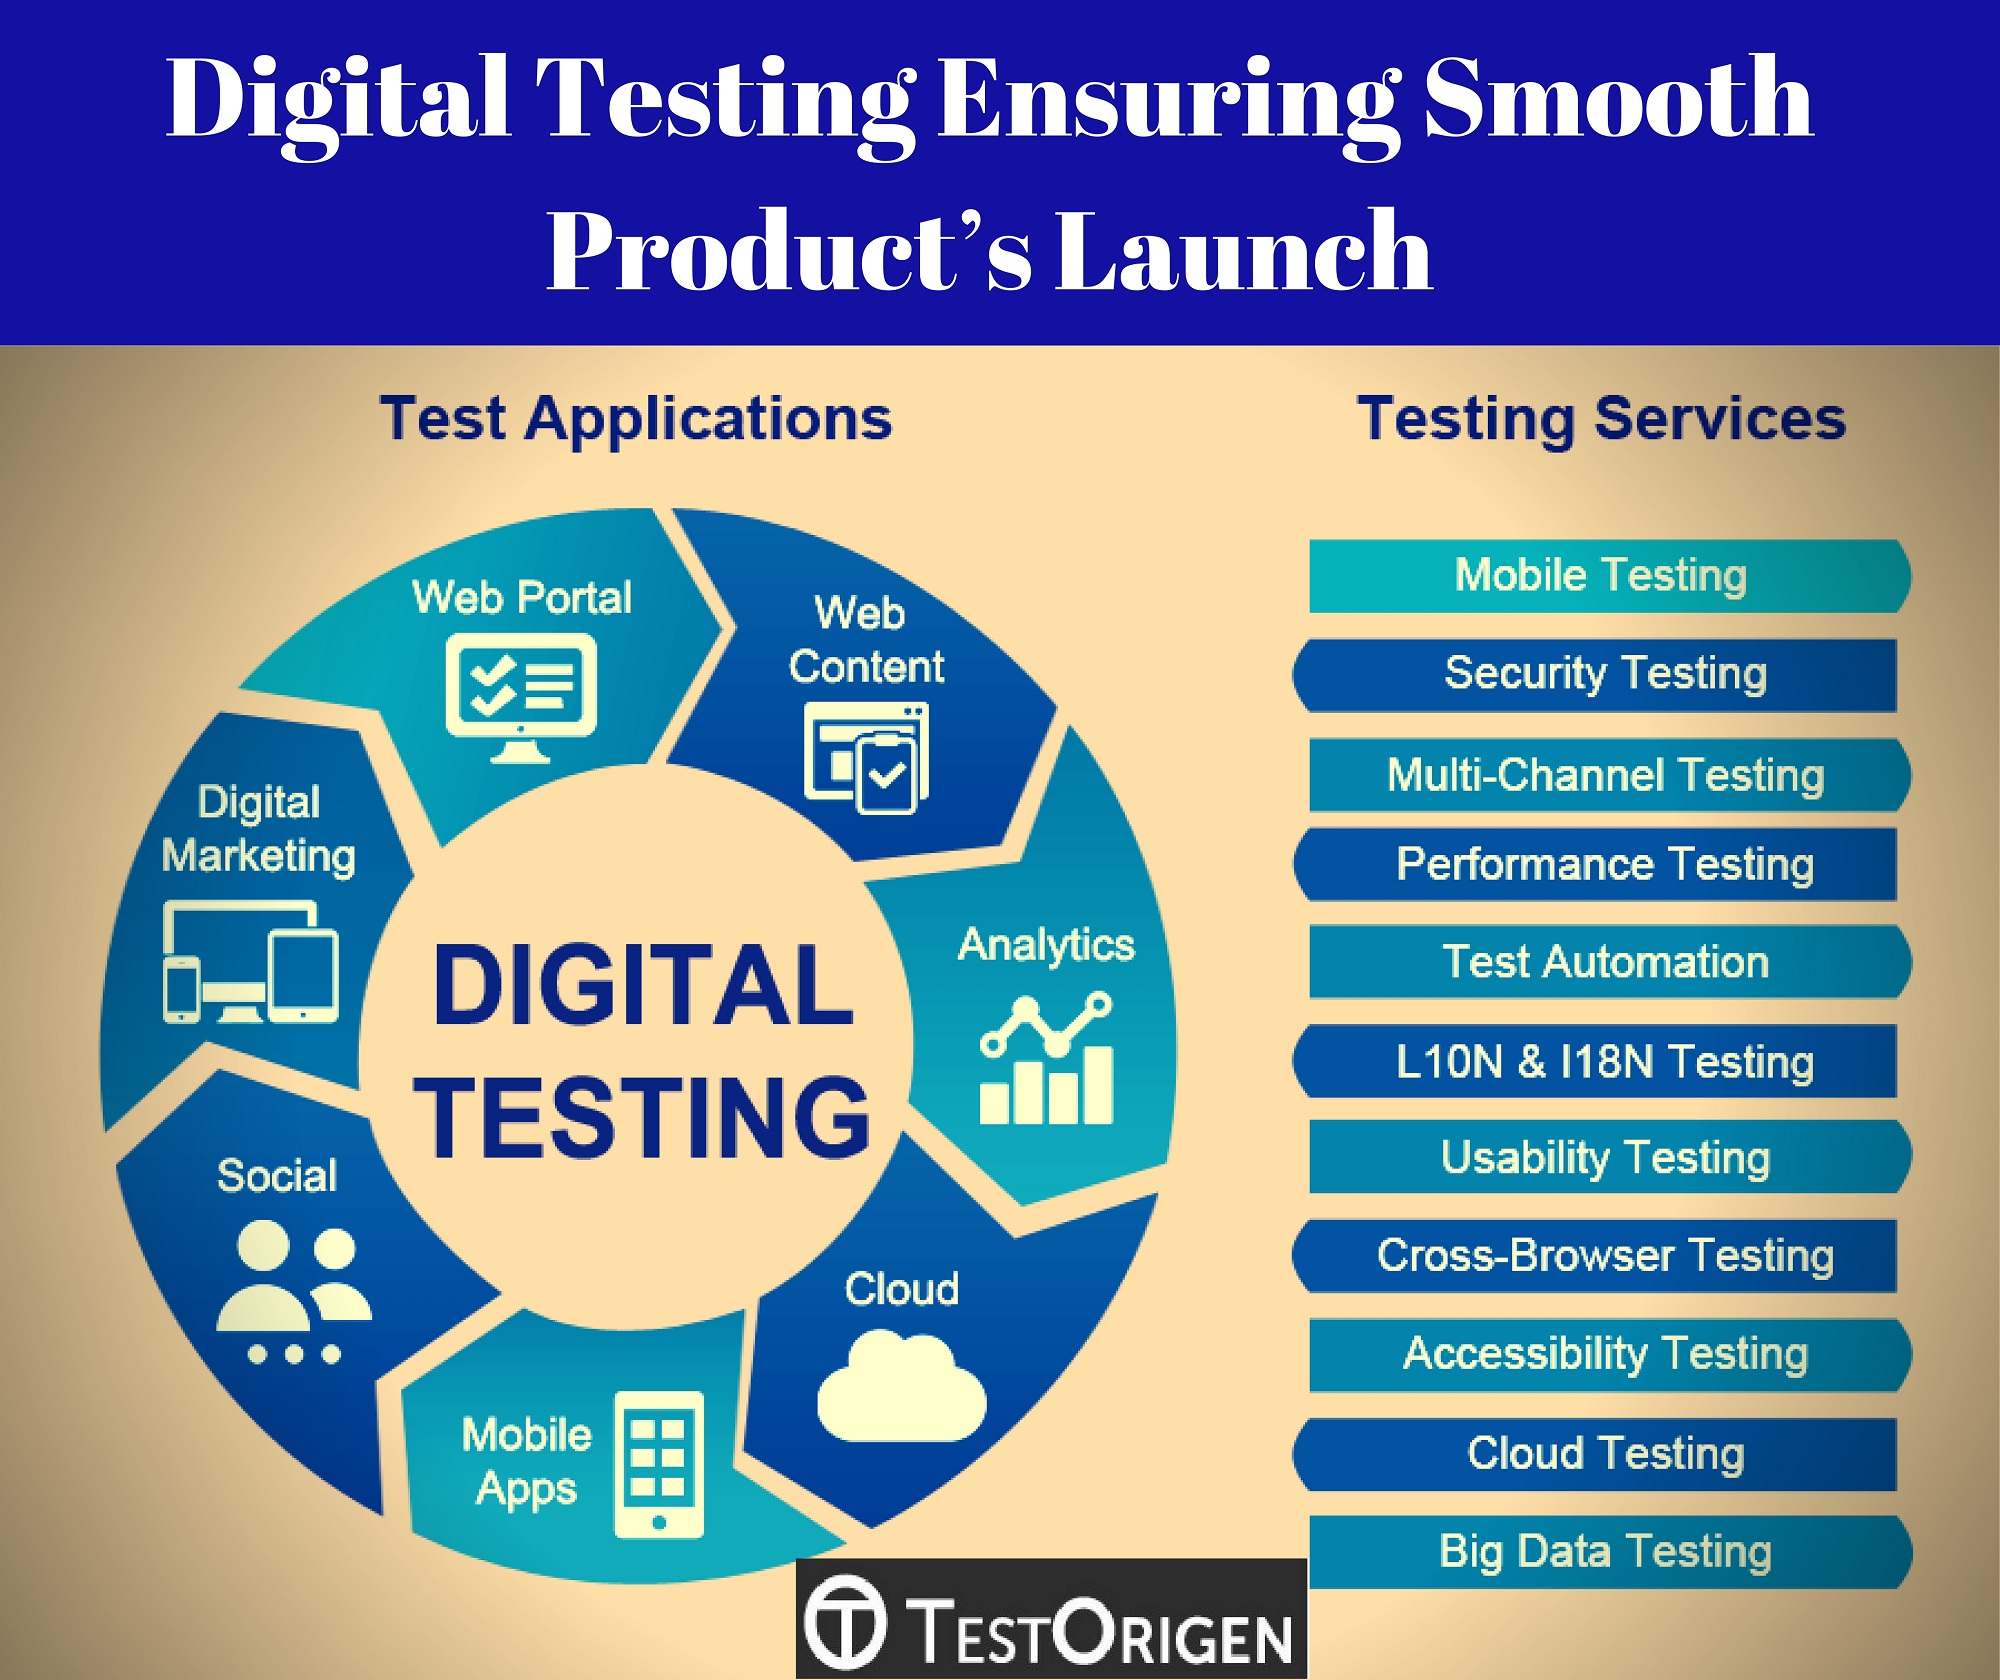 Digital Testing Ensuring Smooth Product’s Launch